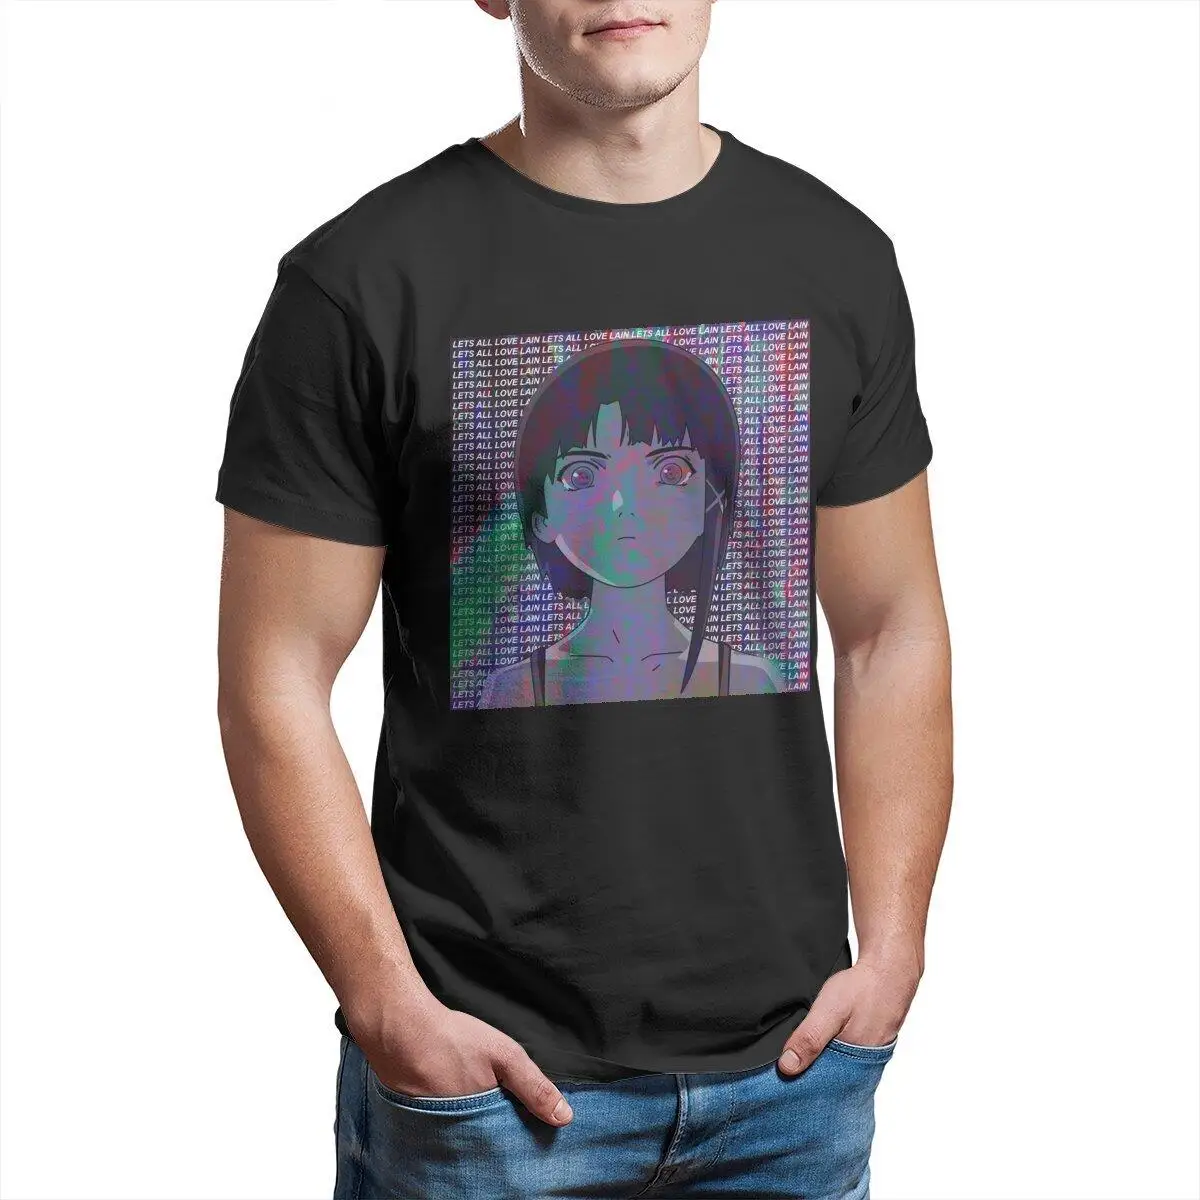 

Men's T-Shirts Serial Experiments Lain Aesthetic Fun 100% Cotton Tees Japanese Anime T Shirt Clothes Birthday Present